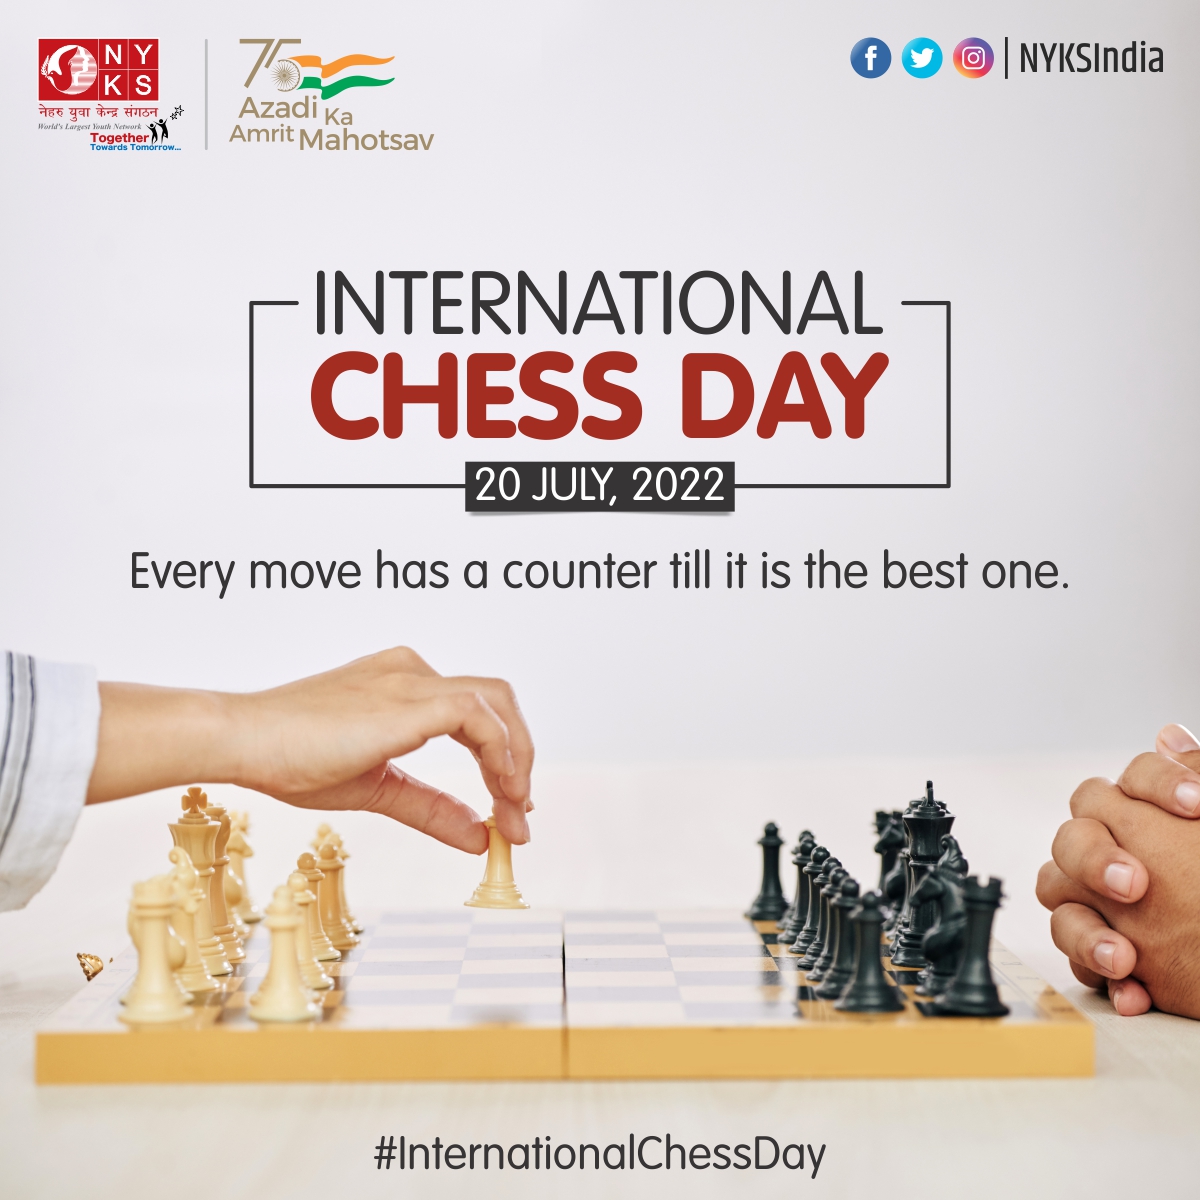 You may learn much more from a game you lose than from a game you win. You will have to lose hundreds of games before becoming a good player. Happy International Chess Day! #chessmaster #chessgame #chessboard #chessplayer #happyinternationalchessday #internationalchessday2022